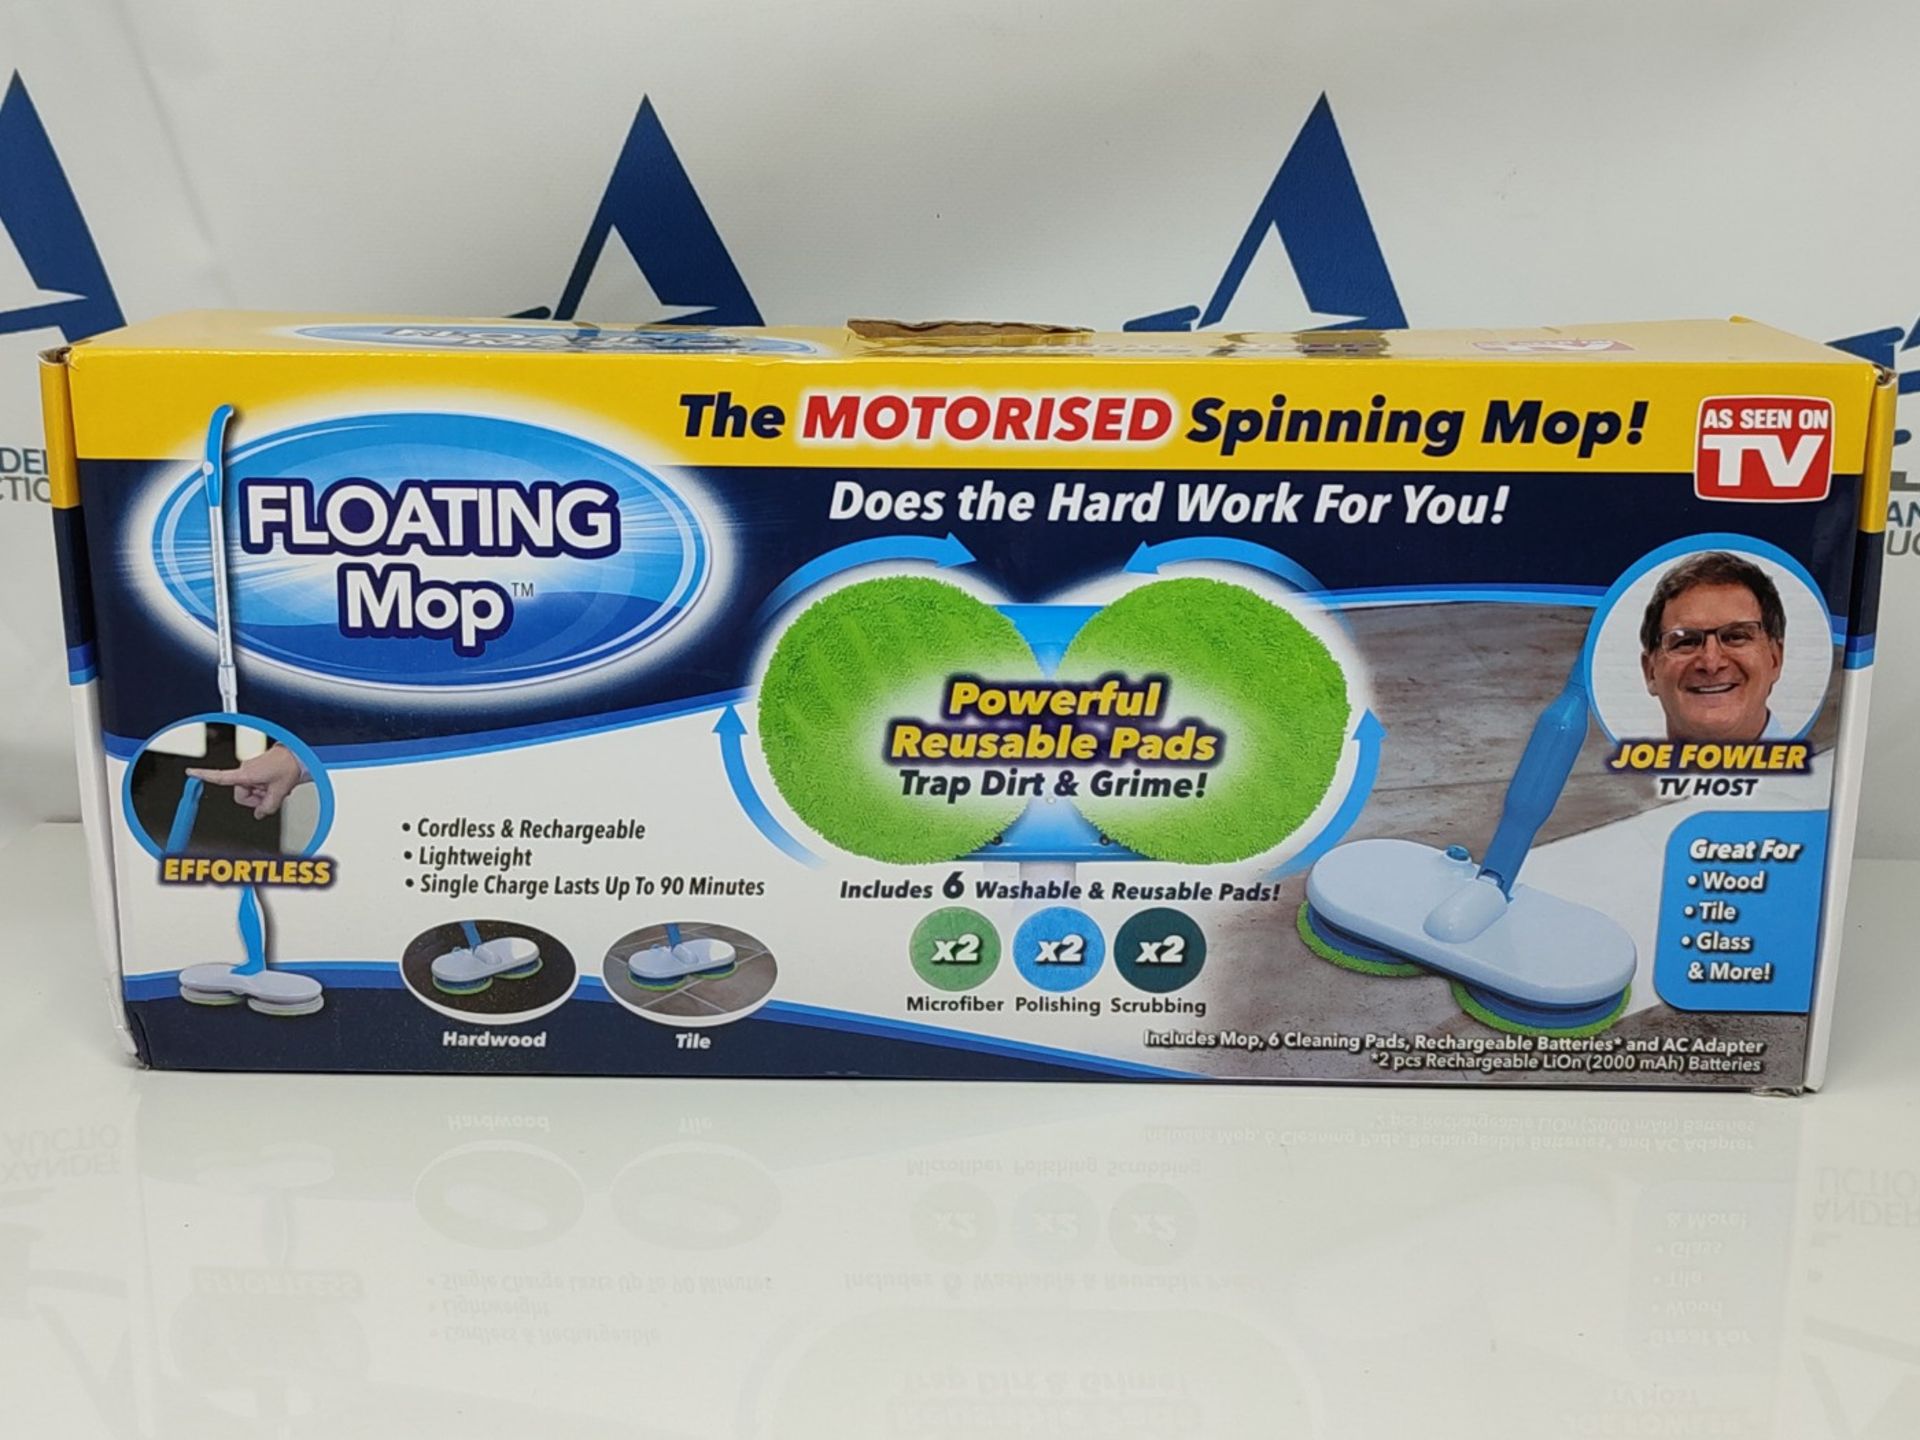 High Street TV Floating Mop - Motorised Cordless & Rechargeable - Spinning Mop - Inclu - Image 2 of 6